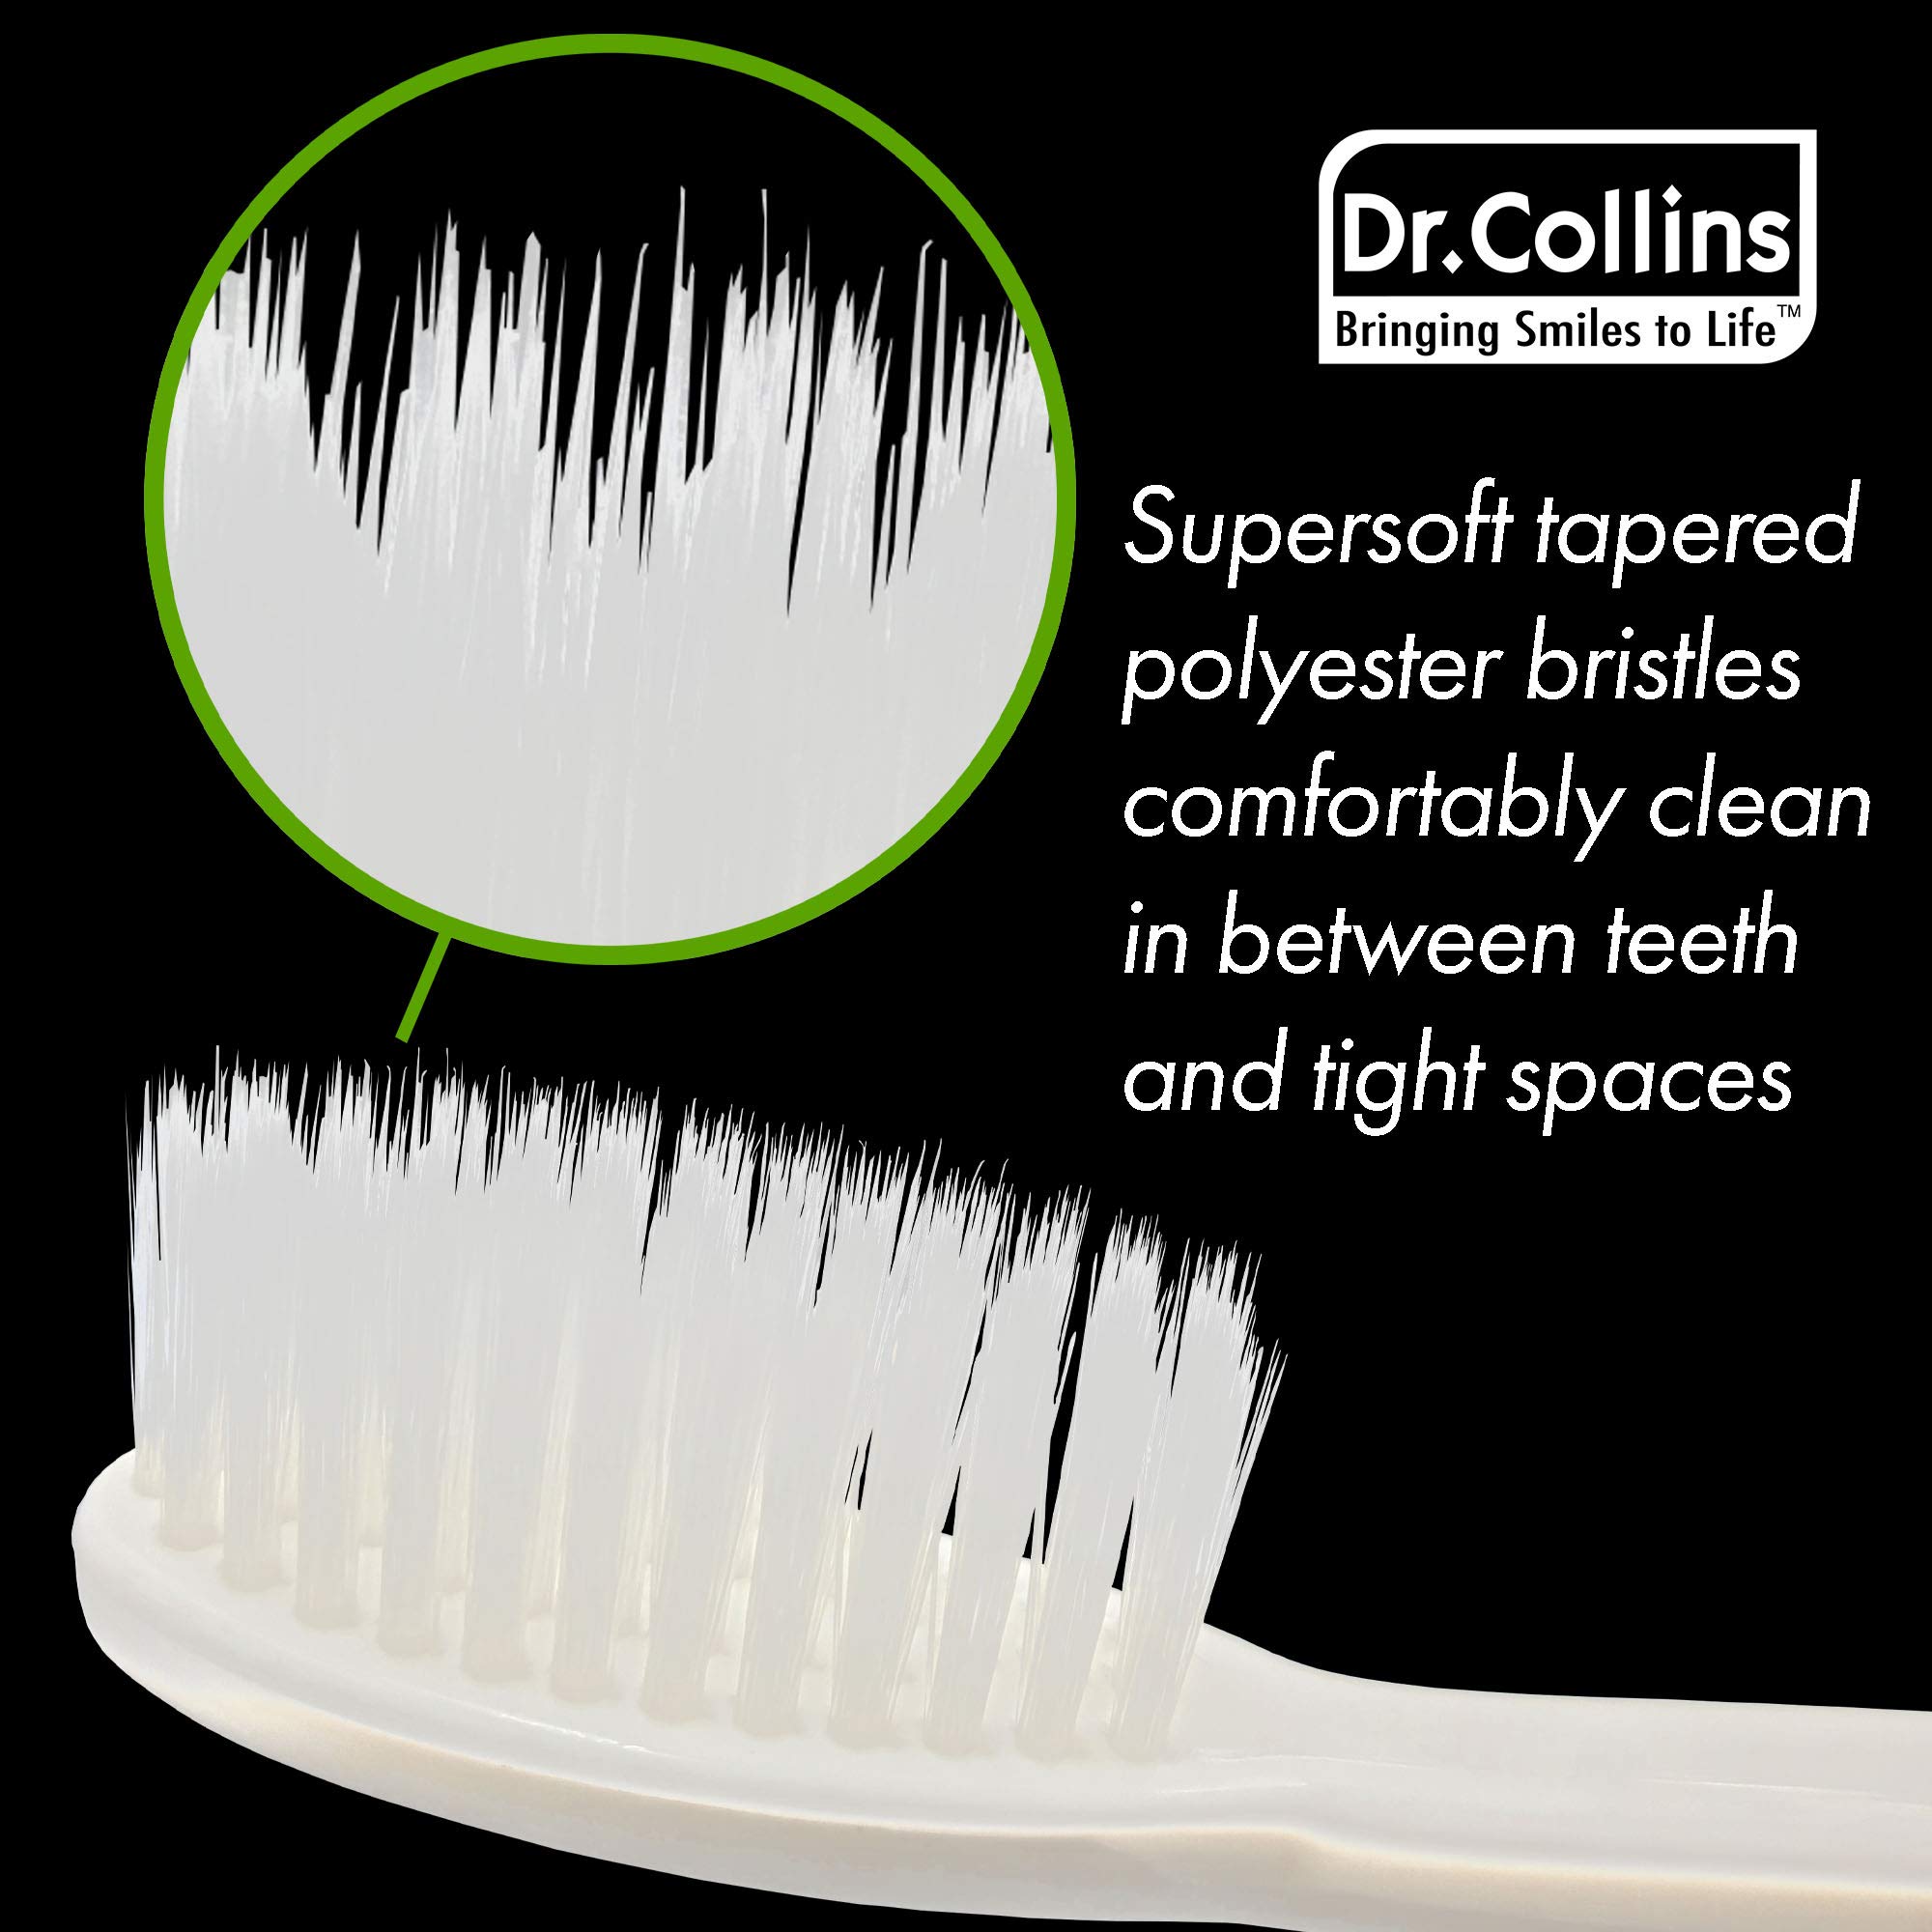 Dr. Collins Perio Toothbrush, (colors vary) 3 Count (Pack of 1)